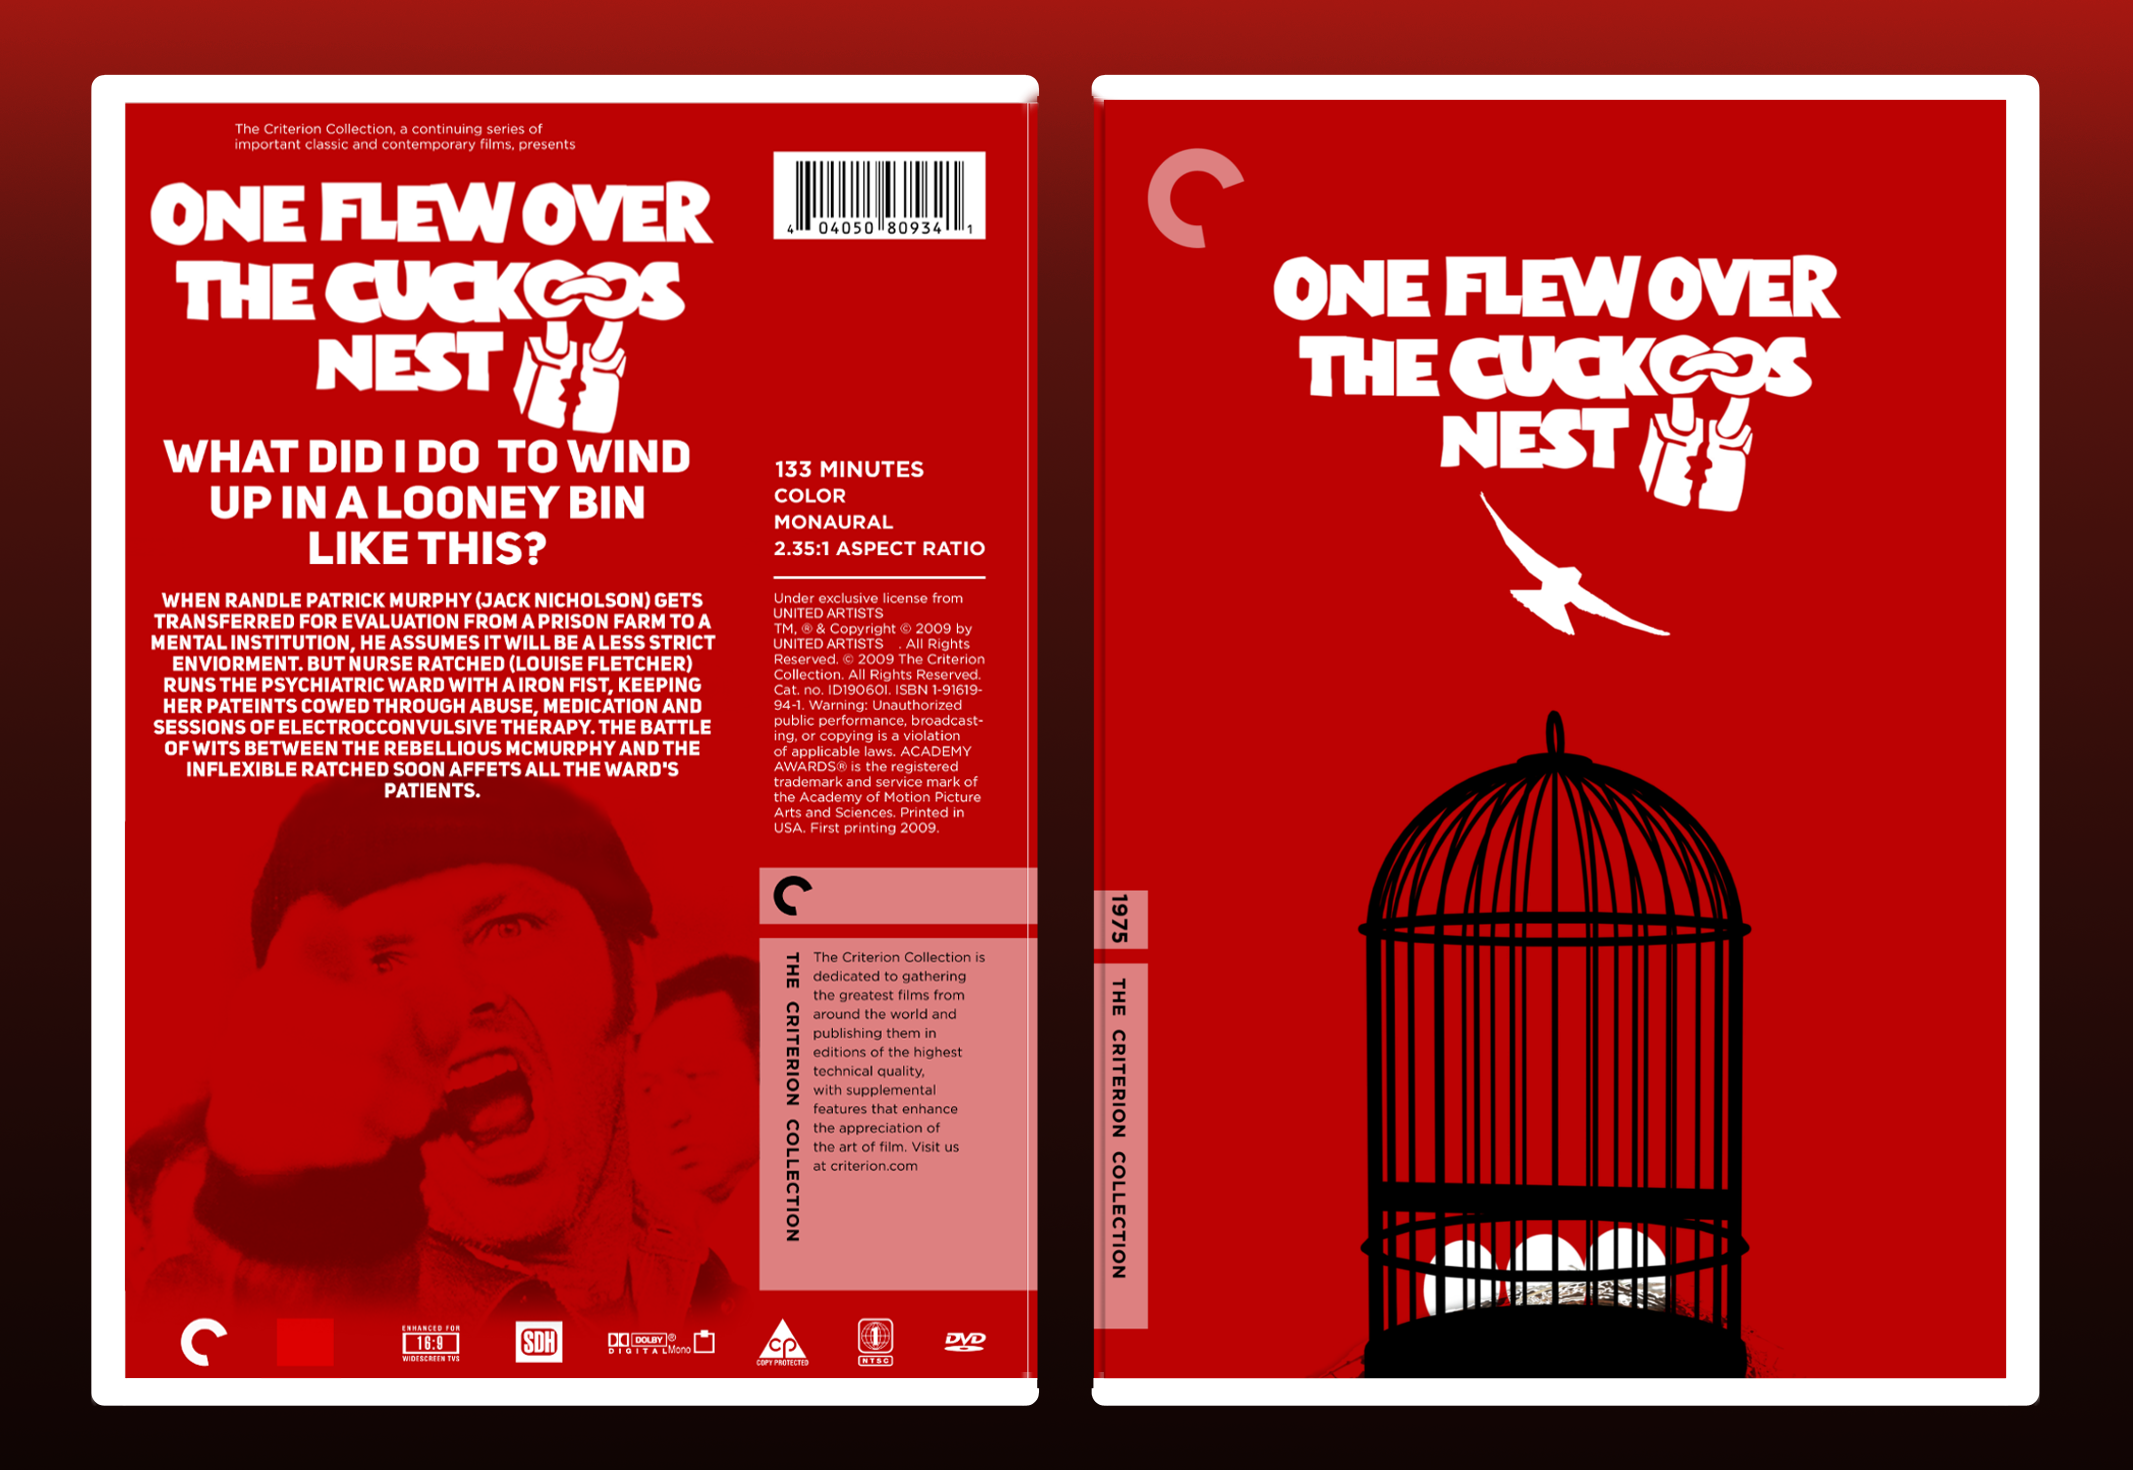 One Flew over the Cuckoos Nest box cover